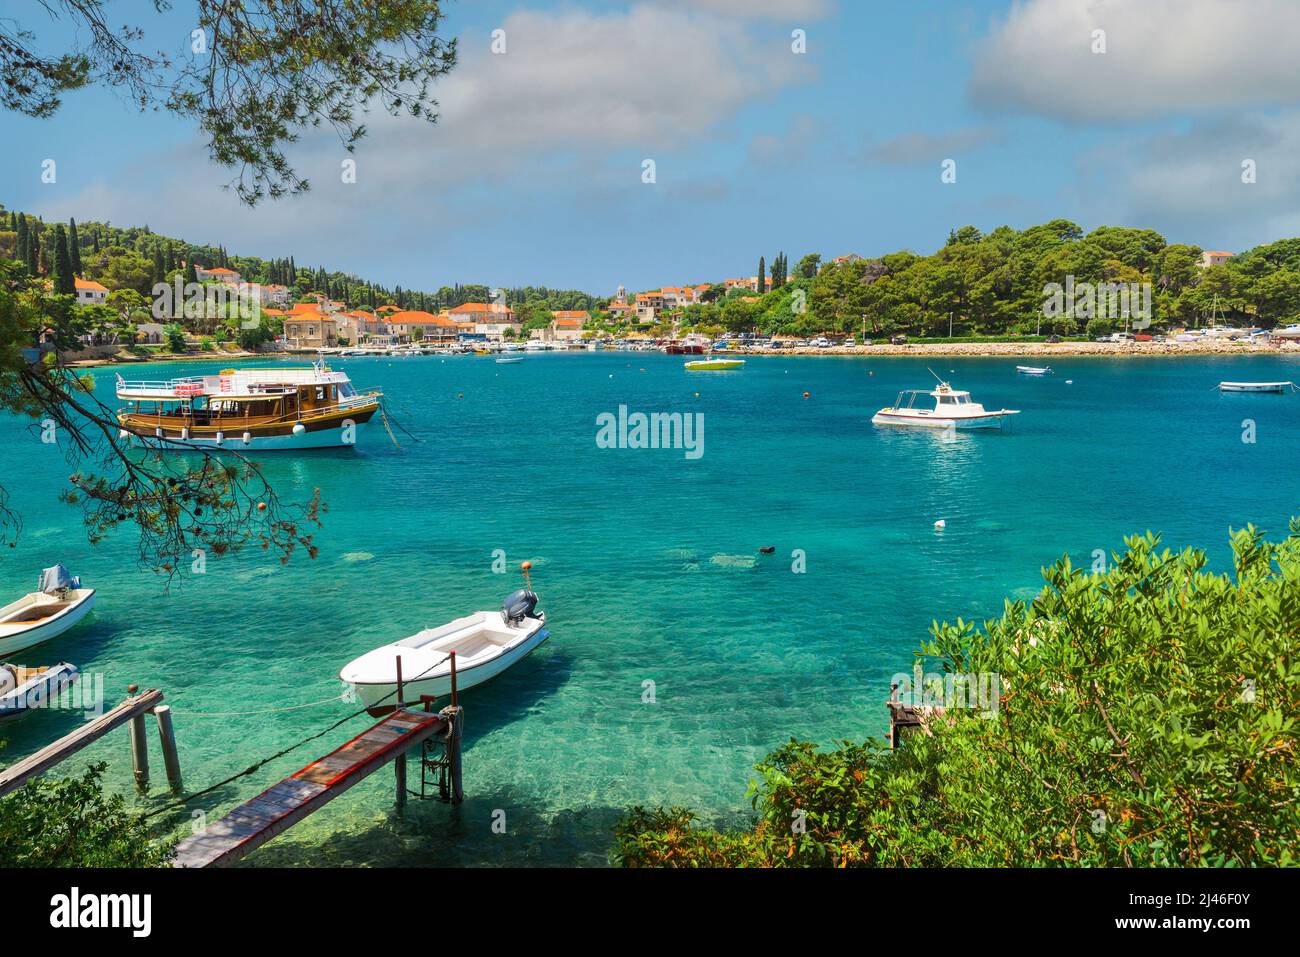 Popular touristic resort Cavtat town near Dubrovnik in Croatia with turquoise water bay. Summer vacation concept Stock Photo